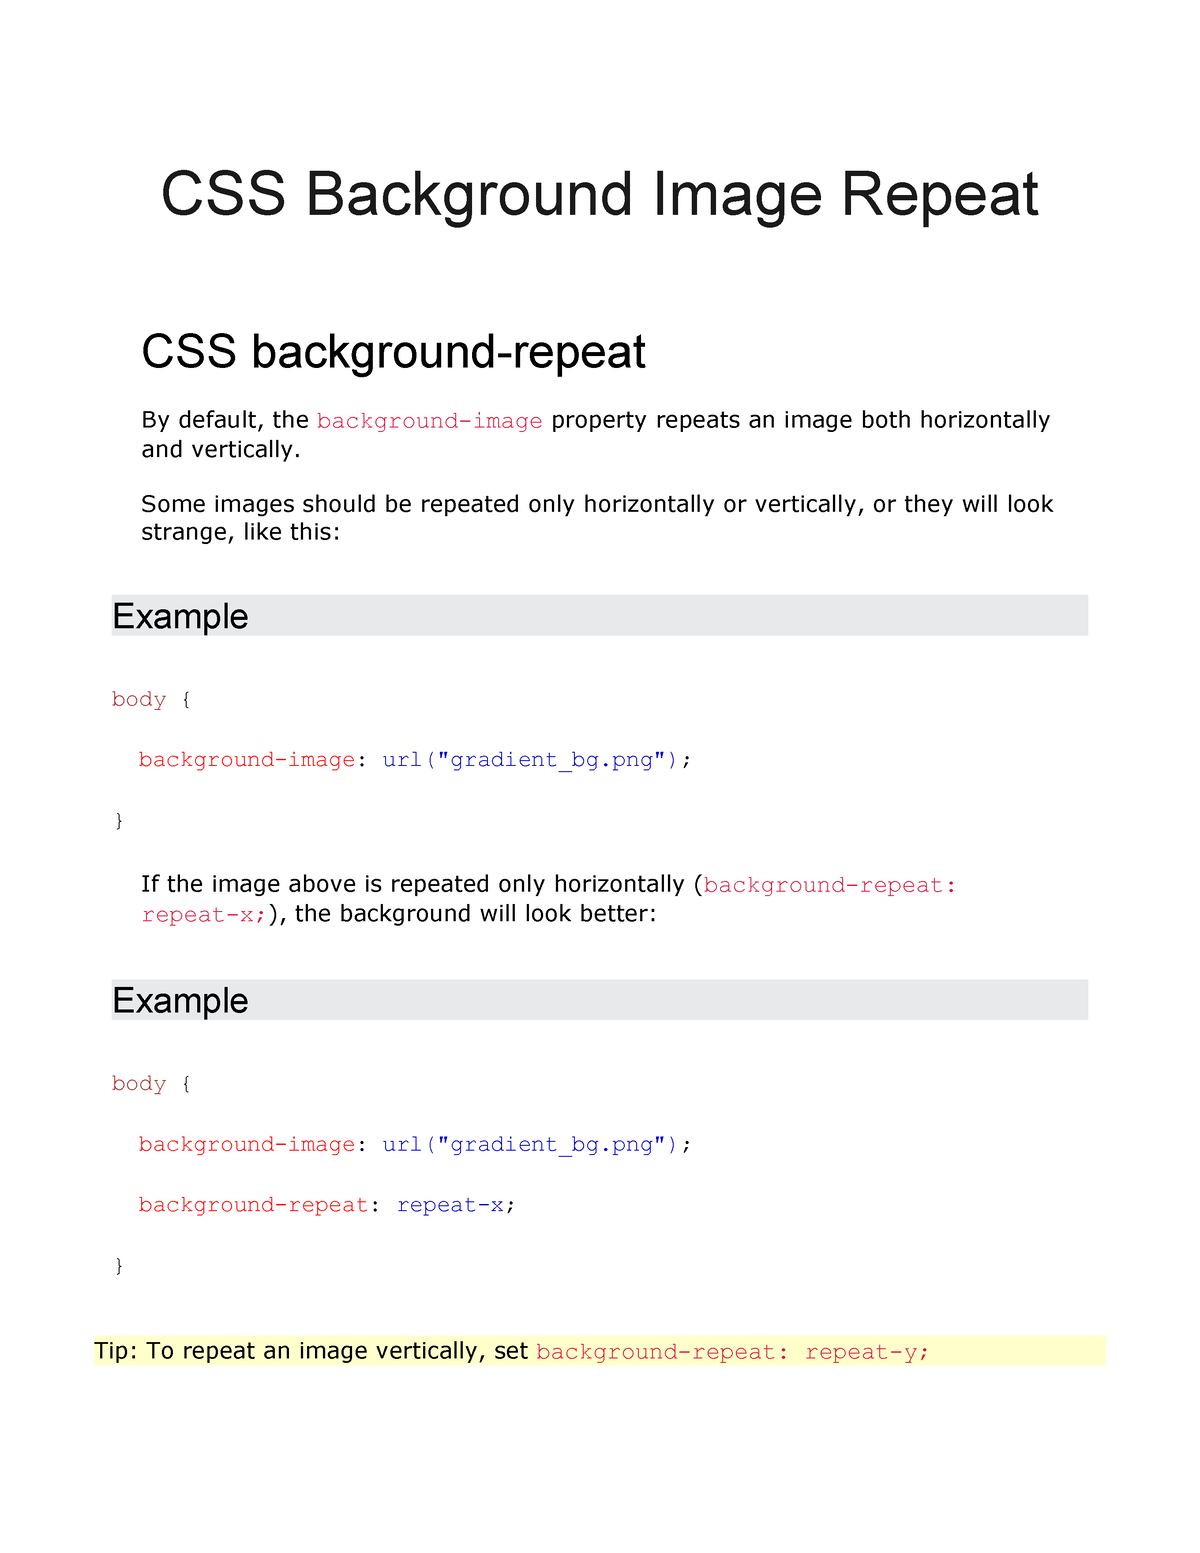 CSS Background Image Repeat - Some images should be repeated only  horizontally or vertically, or - Studocu